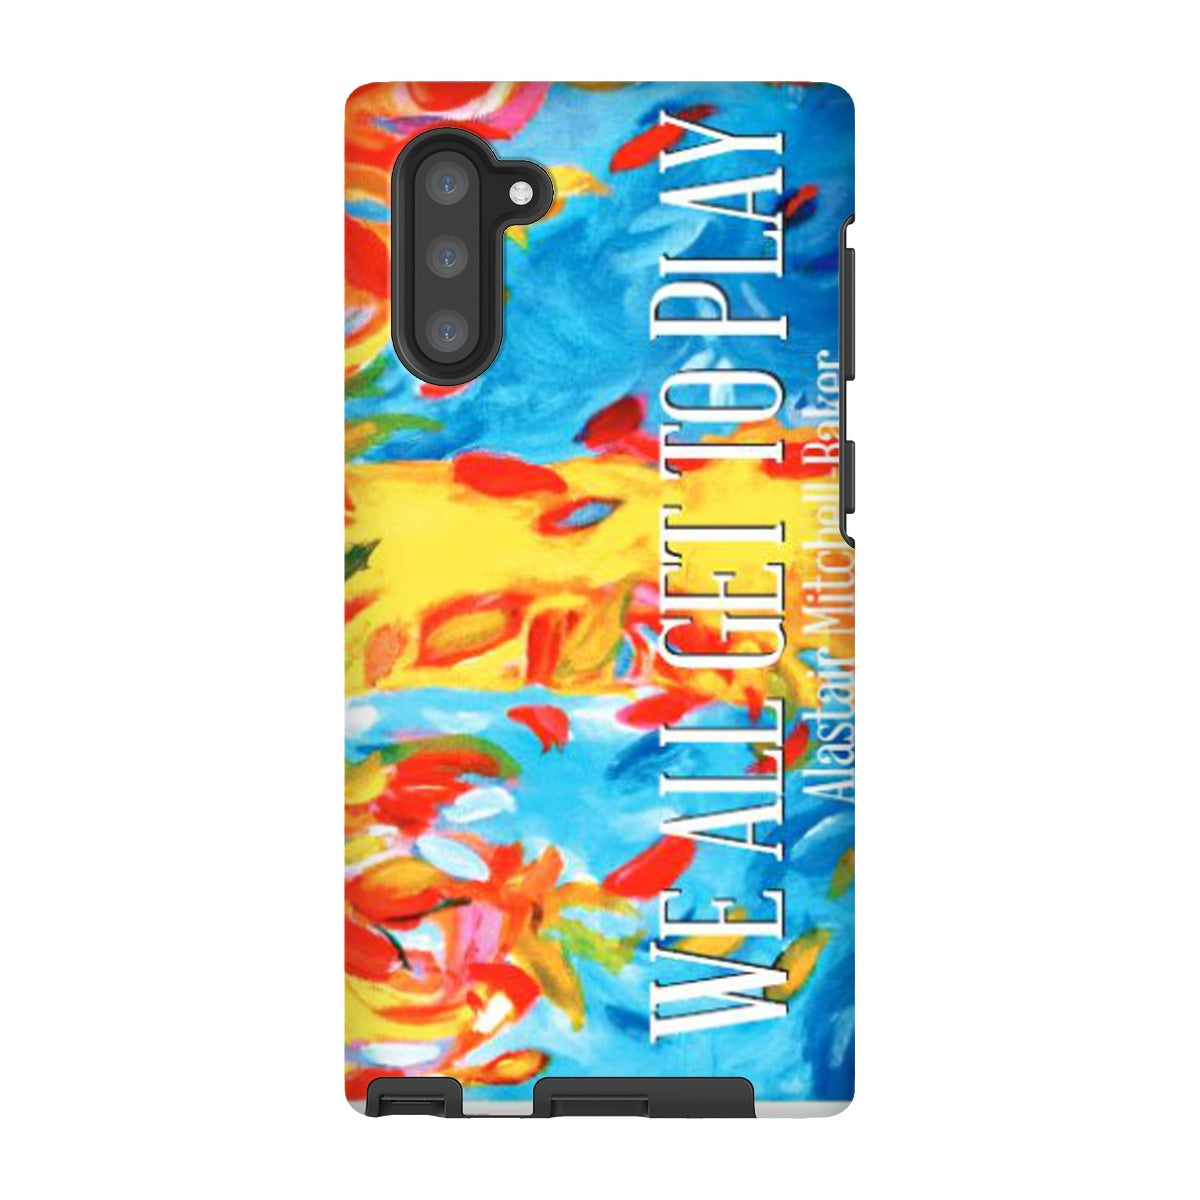 We all Get to Play  Tough Phone Case